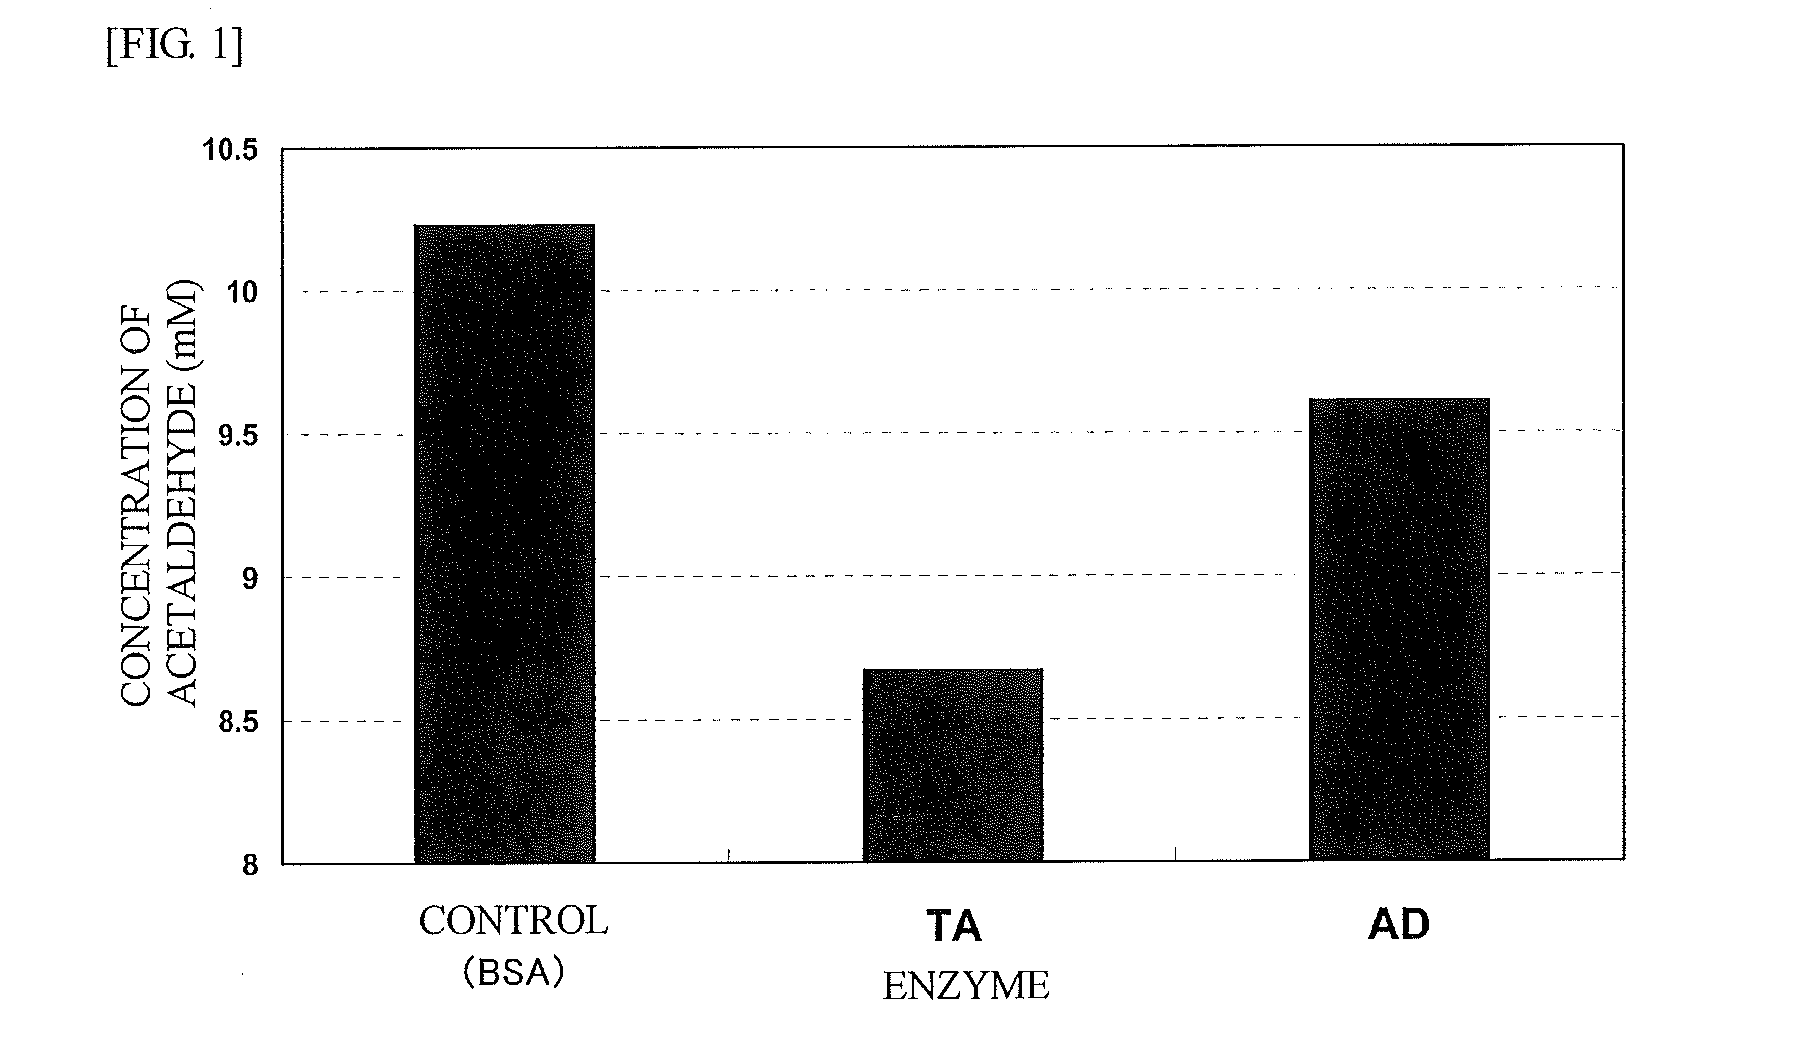 Agent for reducing acetaldehyde in oral cavity